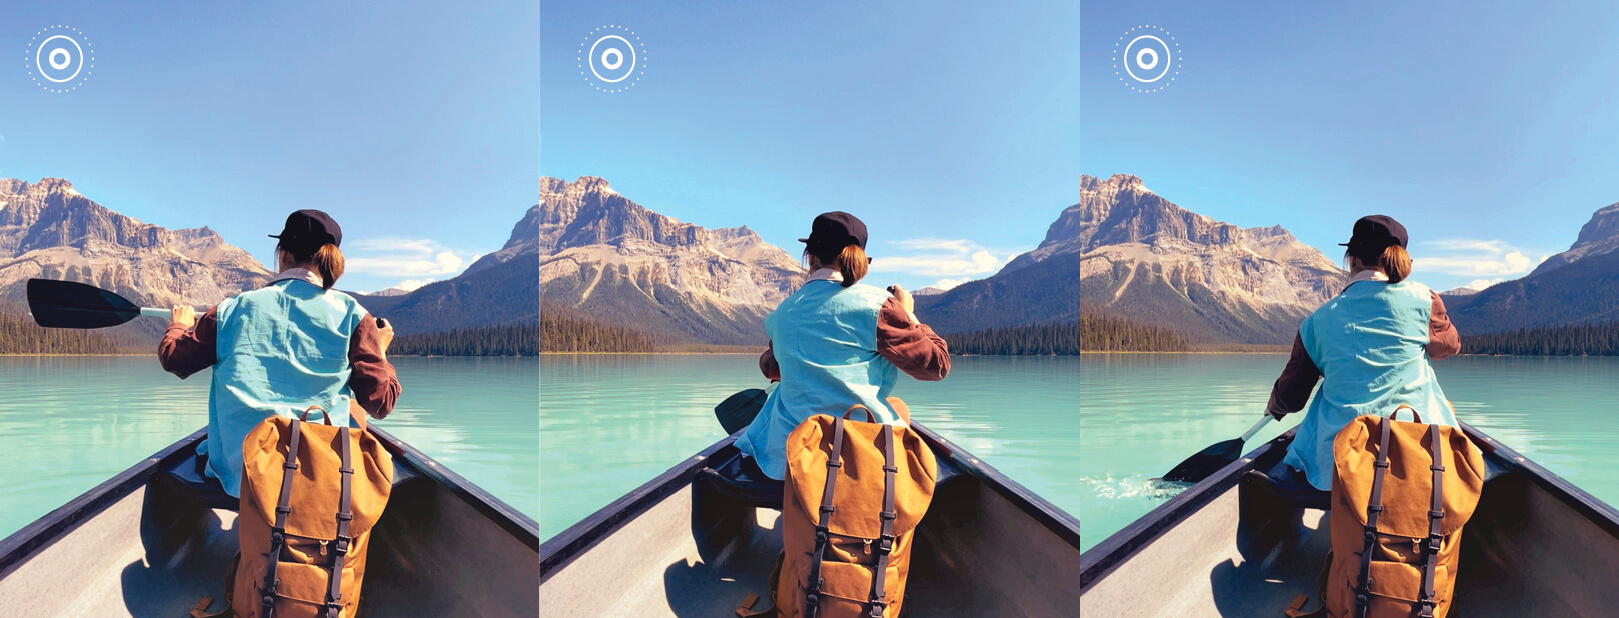 Three side-by-side photos of a person paddling a canoe showing live photo/motion